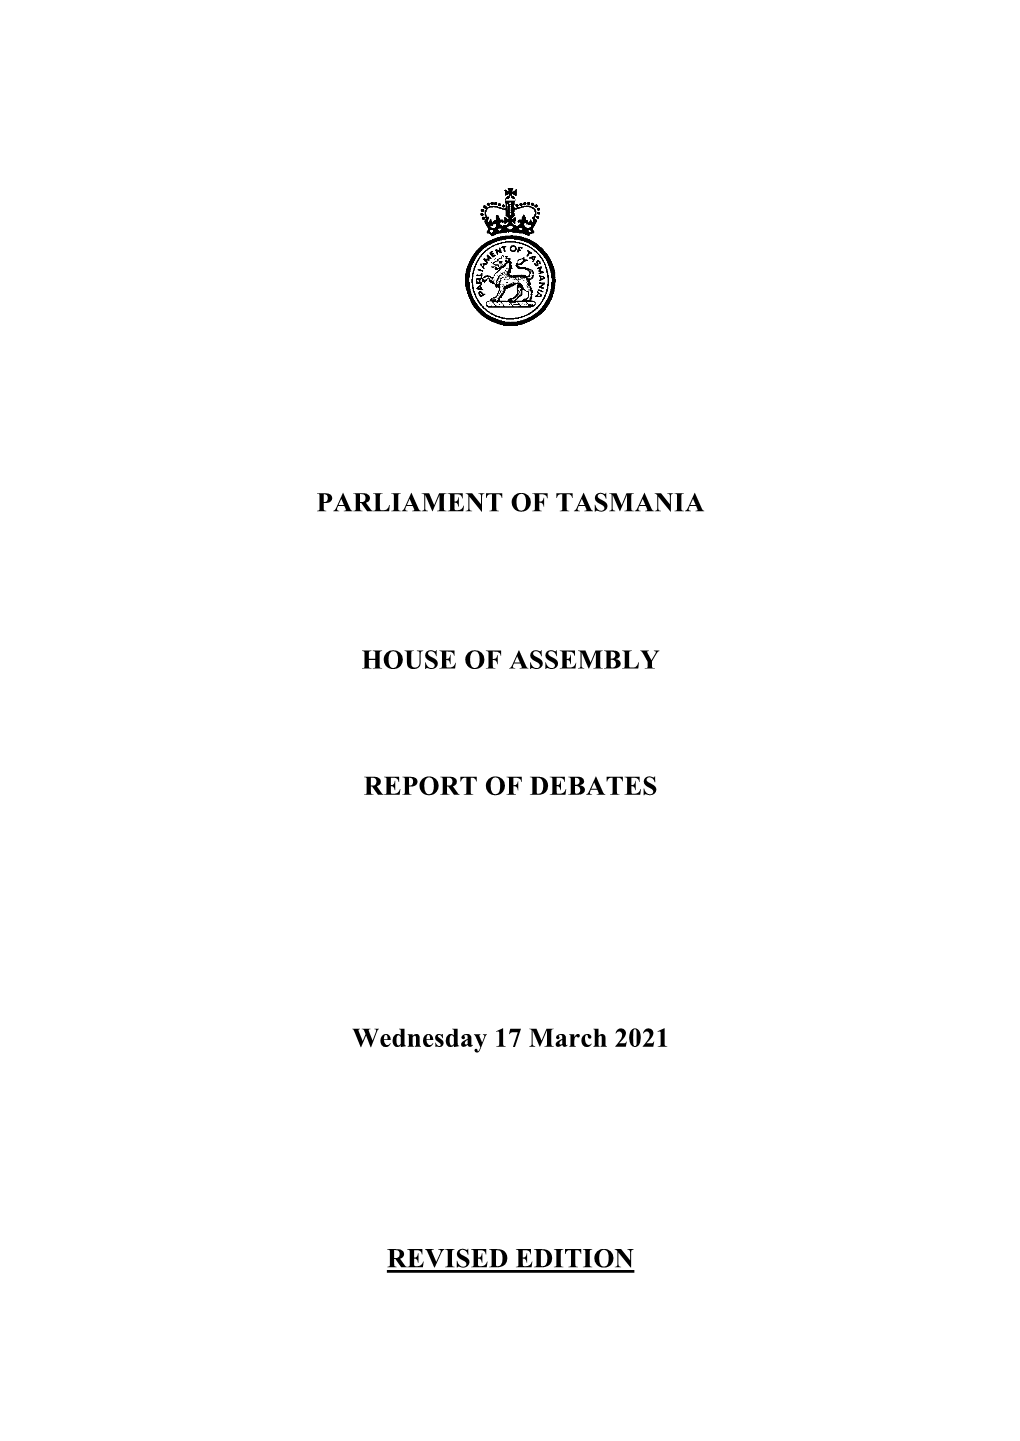 House of Assembly Wednesday 17 March 2021